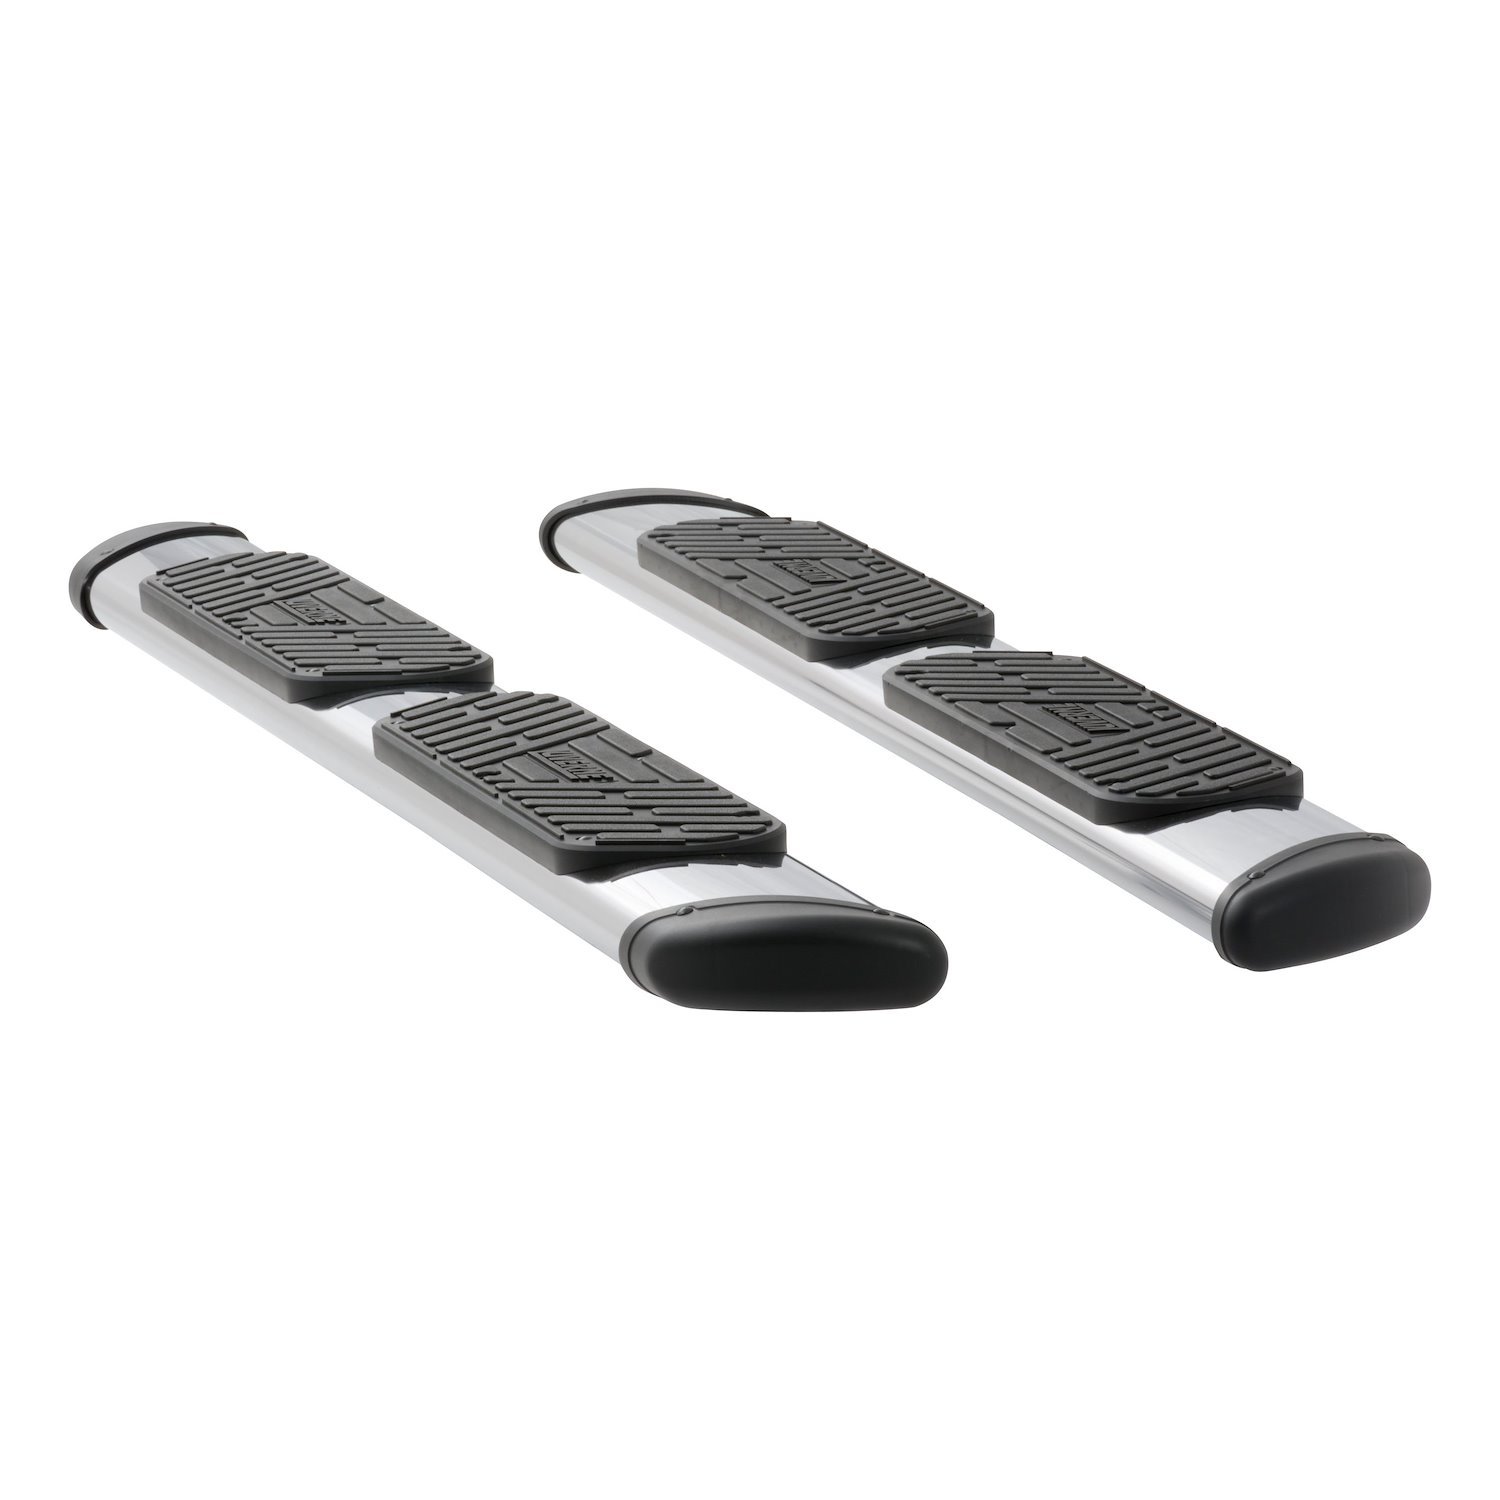 477078-401445 Regal 7 Polished Stainless 78 in. Oval Steps Fits Select Chevy Silverado, GMC Sierra Ext. Cab